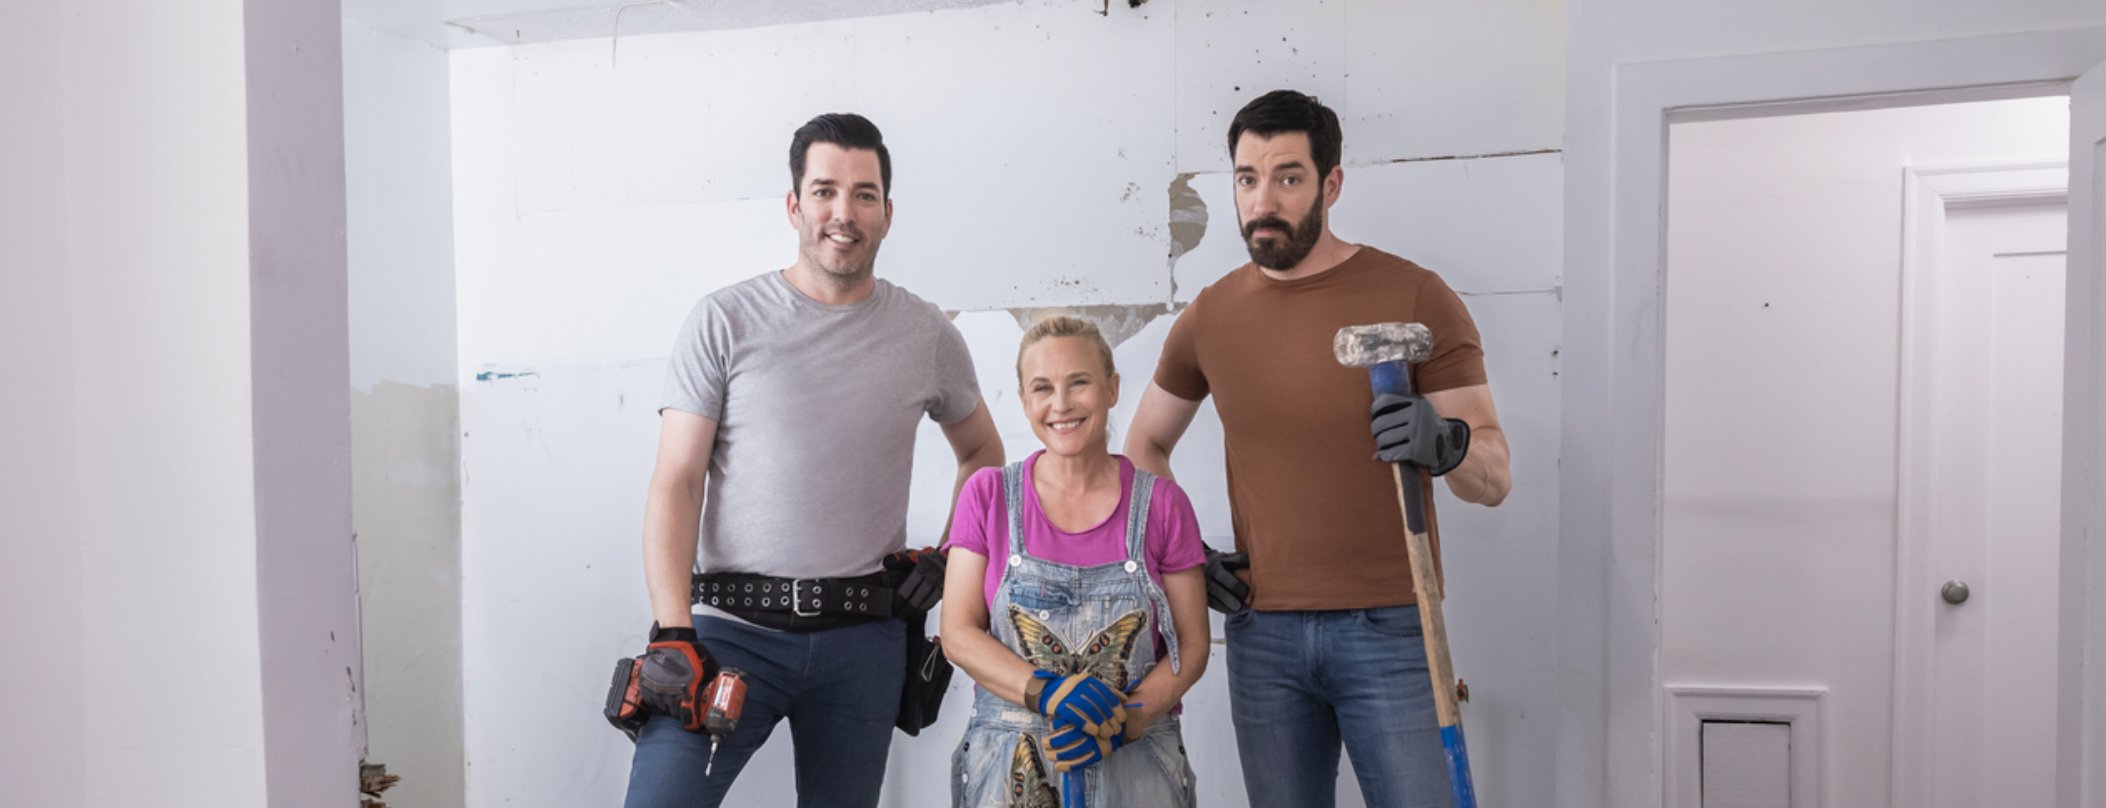 More Award-Winning Hollywood Stars Join Drew and Jonathan Scott in New Episodes of CELEBRITY IOU